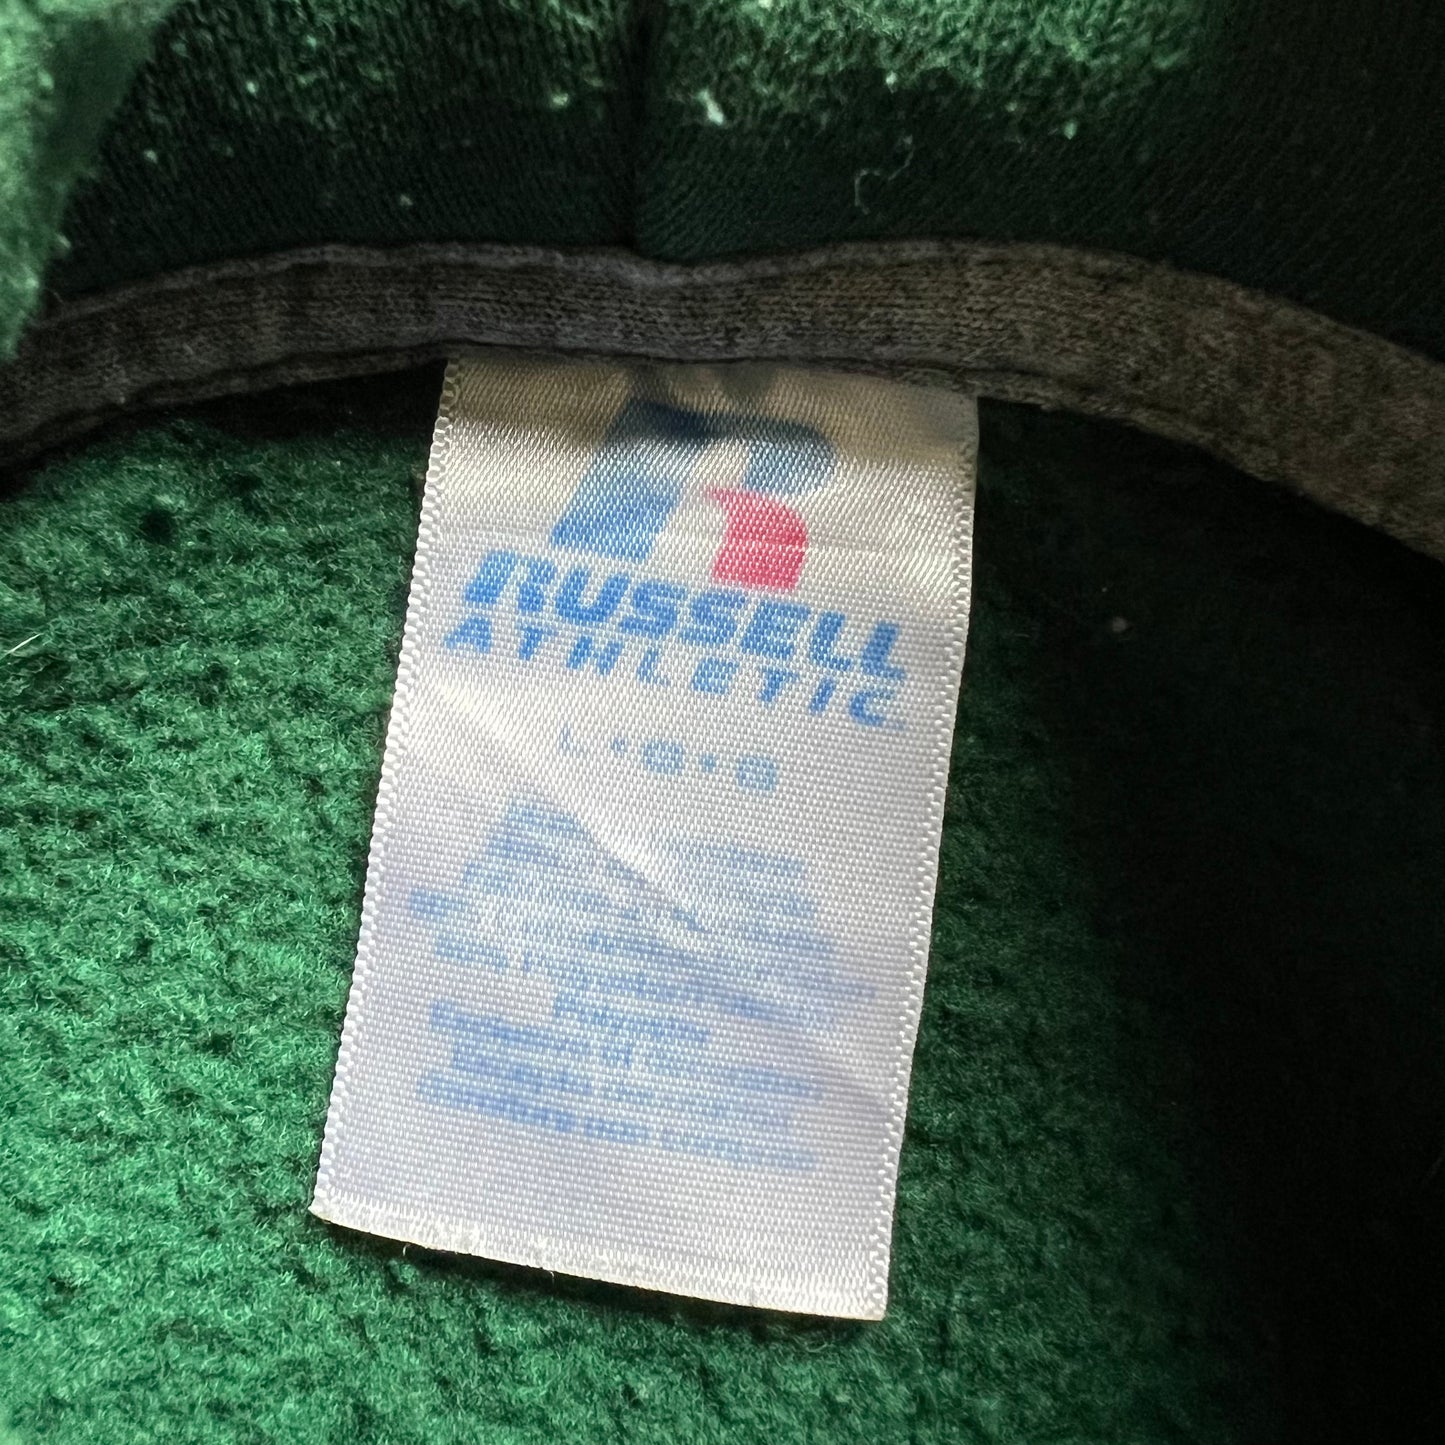 00's RUSSELL ATHLETIC "OSWEGO STATE" HOODIE